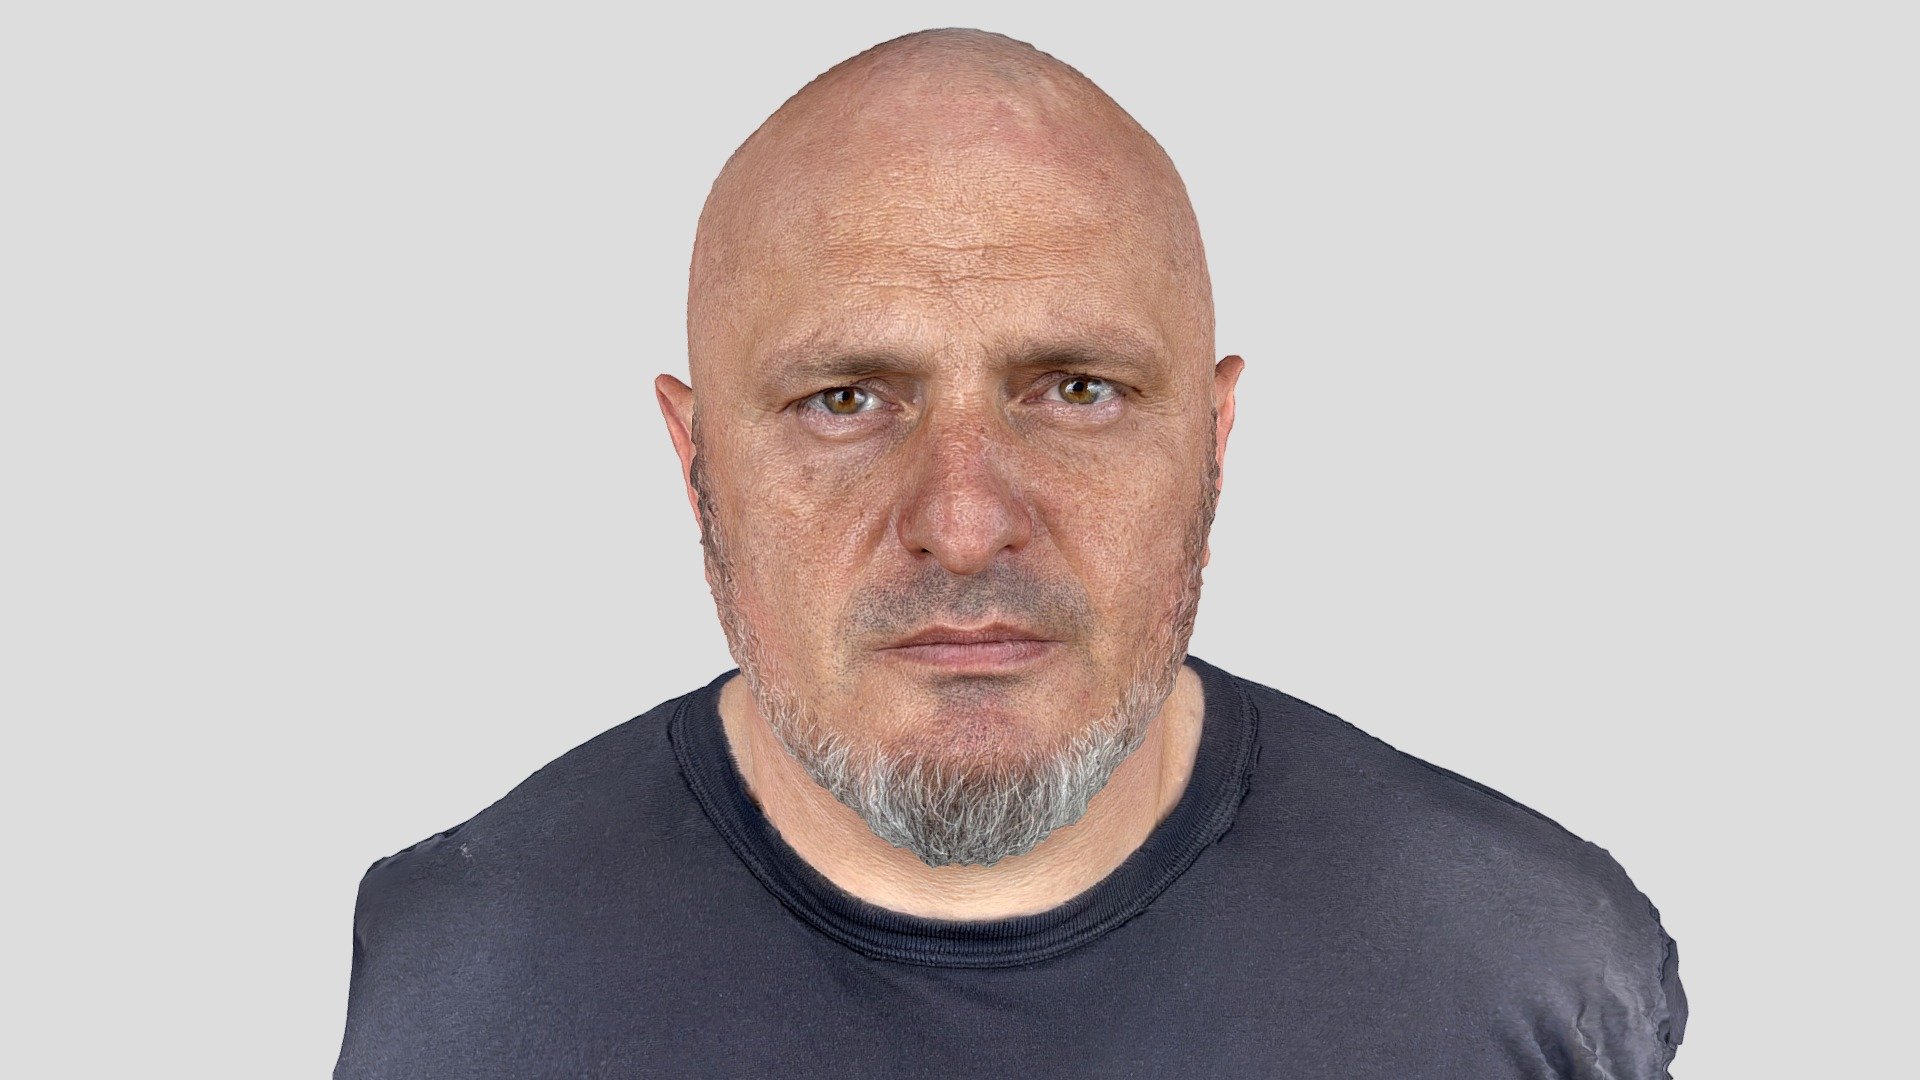 Photorealistic head scan of mature bold bearded man.

Shot on iPhone 12 Pro Max, processed in Photocatch app on Macbook Air M1.

P.S. you are welcome to contact me if you need the files 3d model